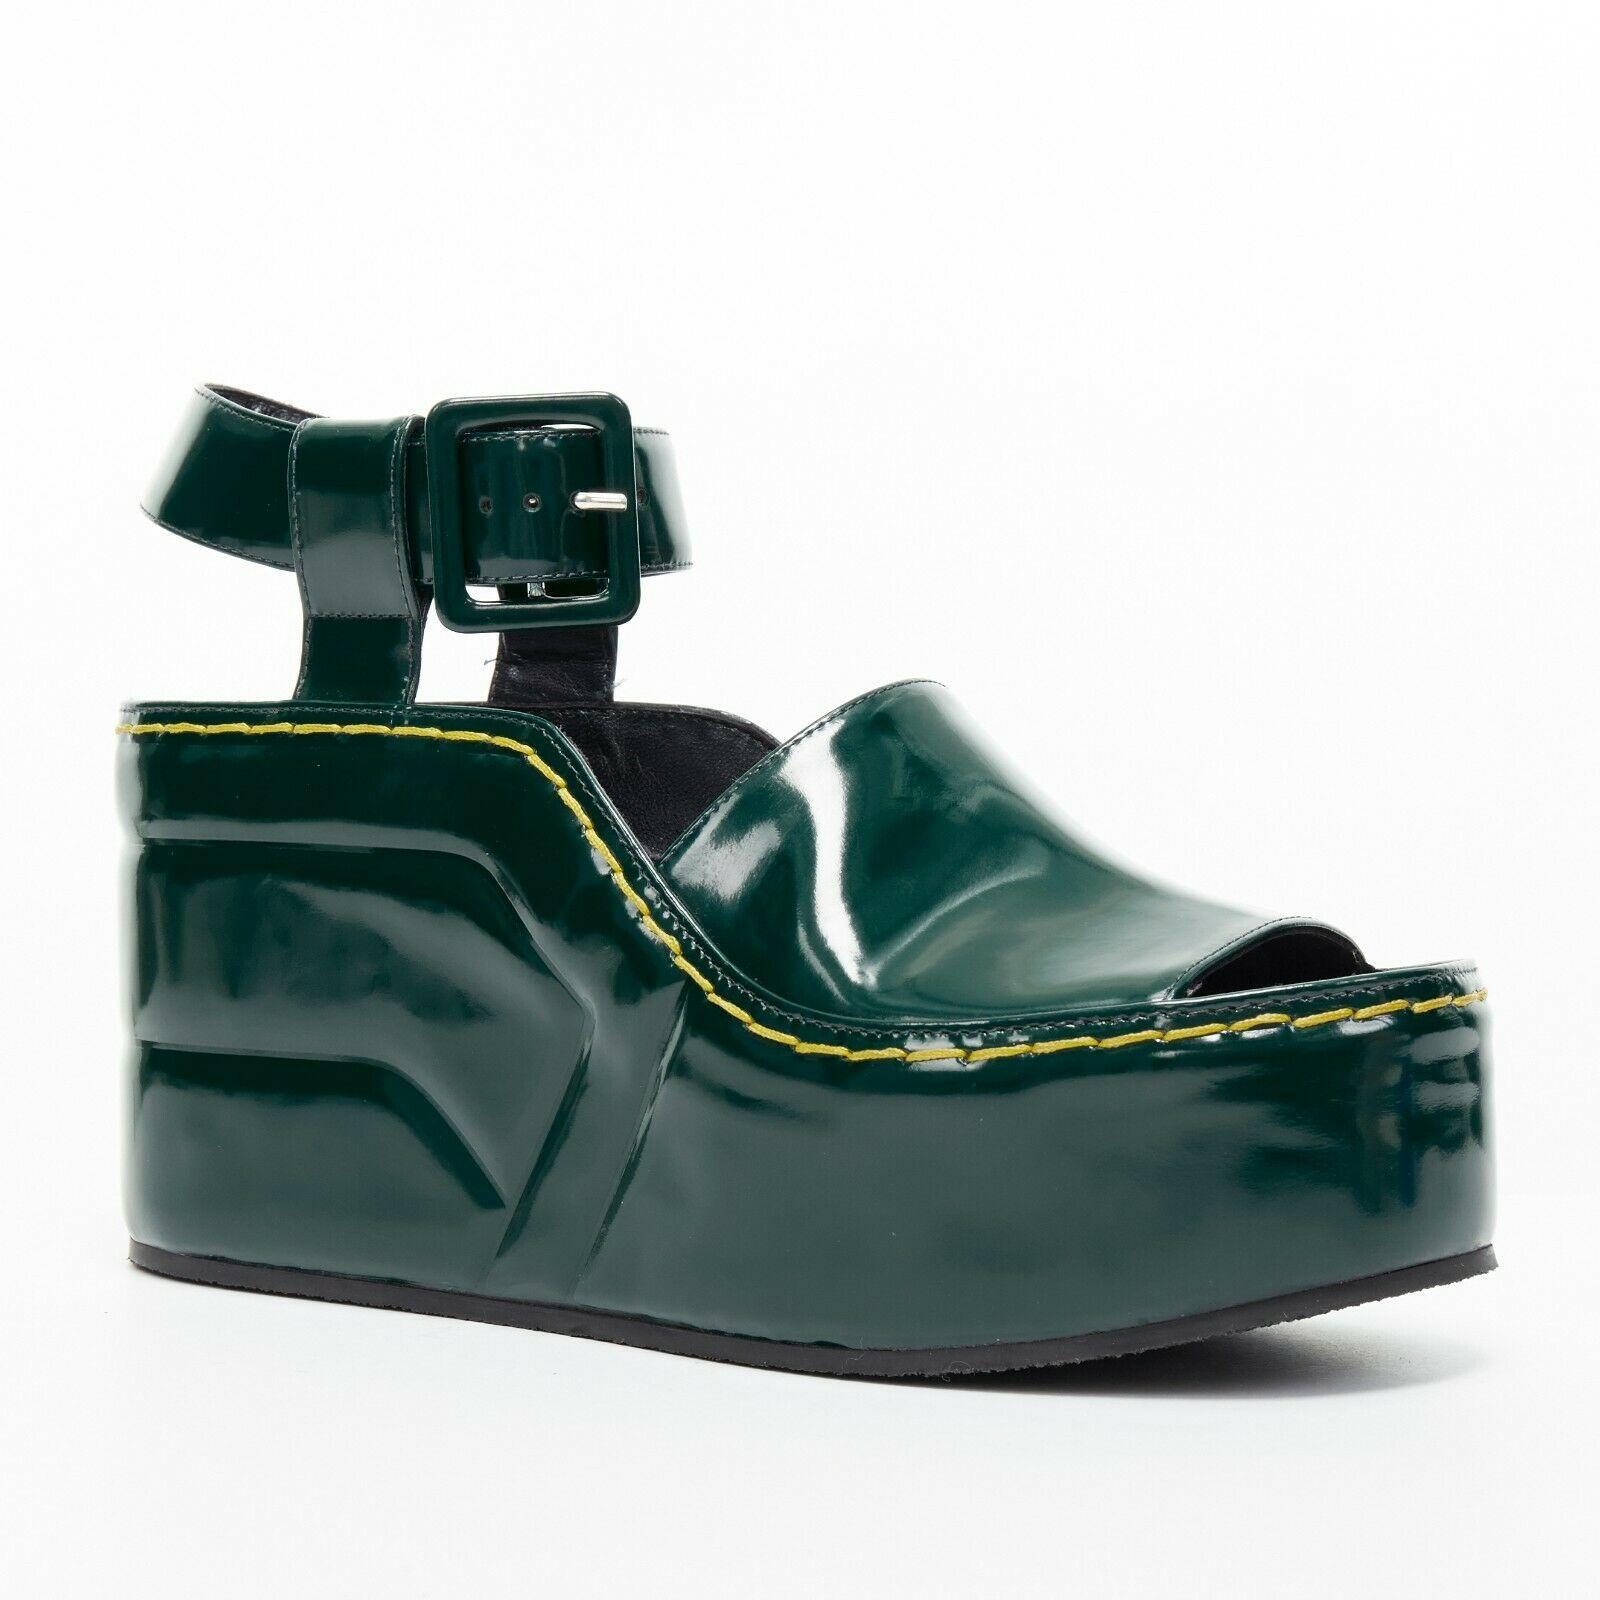 new CELINE AW14 runway dark green polished leather Doc Marten platform EU40
CELINE BY PHOEBE PHILO
FROM THE FALL WINTER 2014 COLLECTION
Forest green polished leather upper. 
Doc Marten inspired. 
Yellow contrast thick stitching along outsole. 
Thick